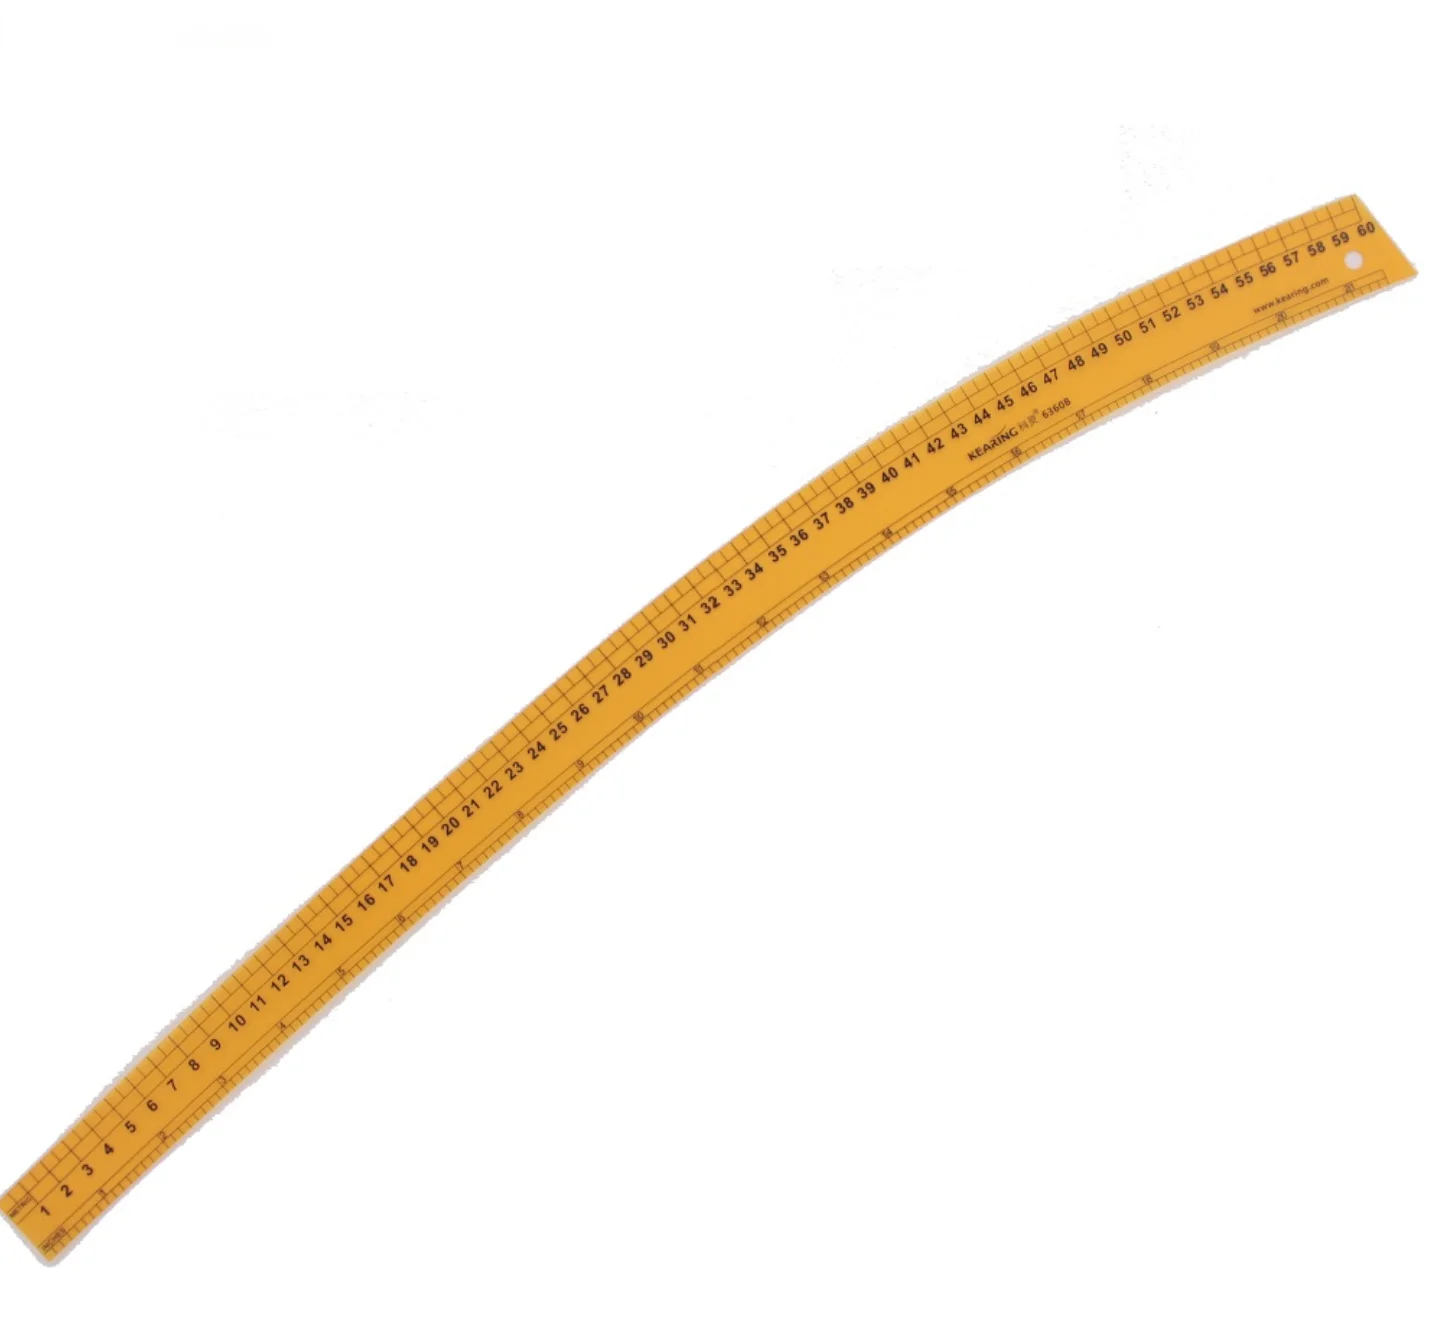 

60 cm Durable Plastic Vary Form Curve Ruler with Sandwich Line for Handicraft Pattern Making For Sew Area 1.2mm Thick #6360B